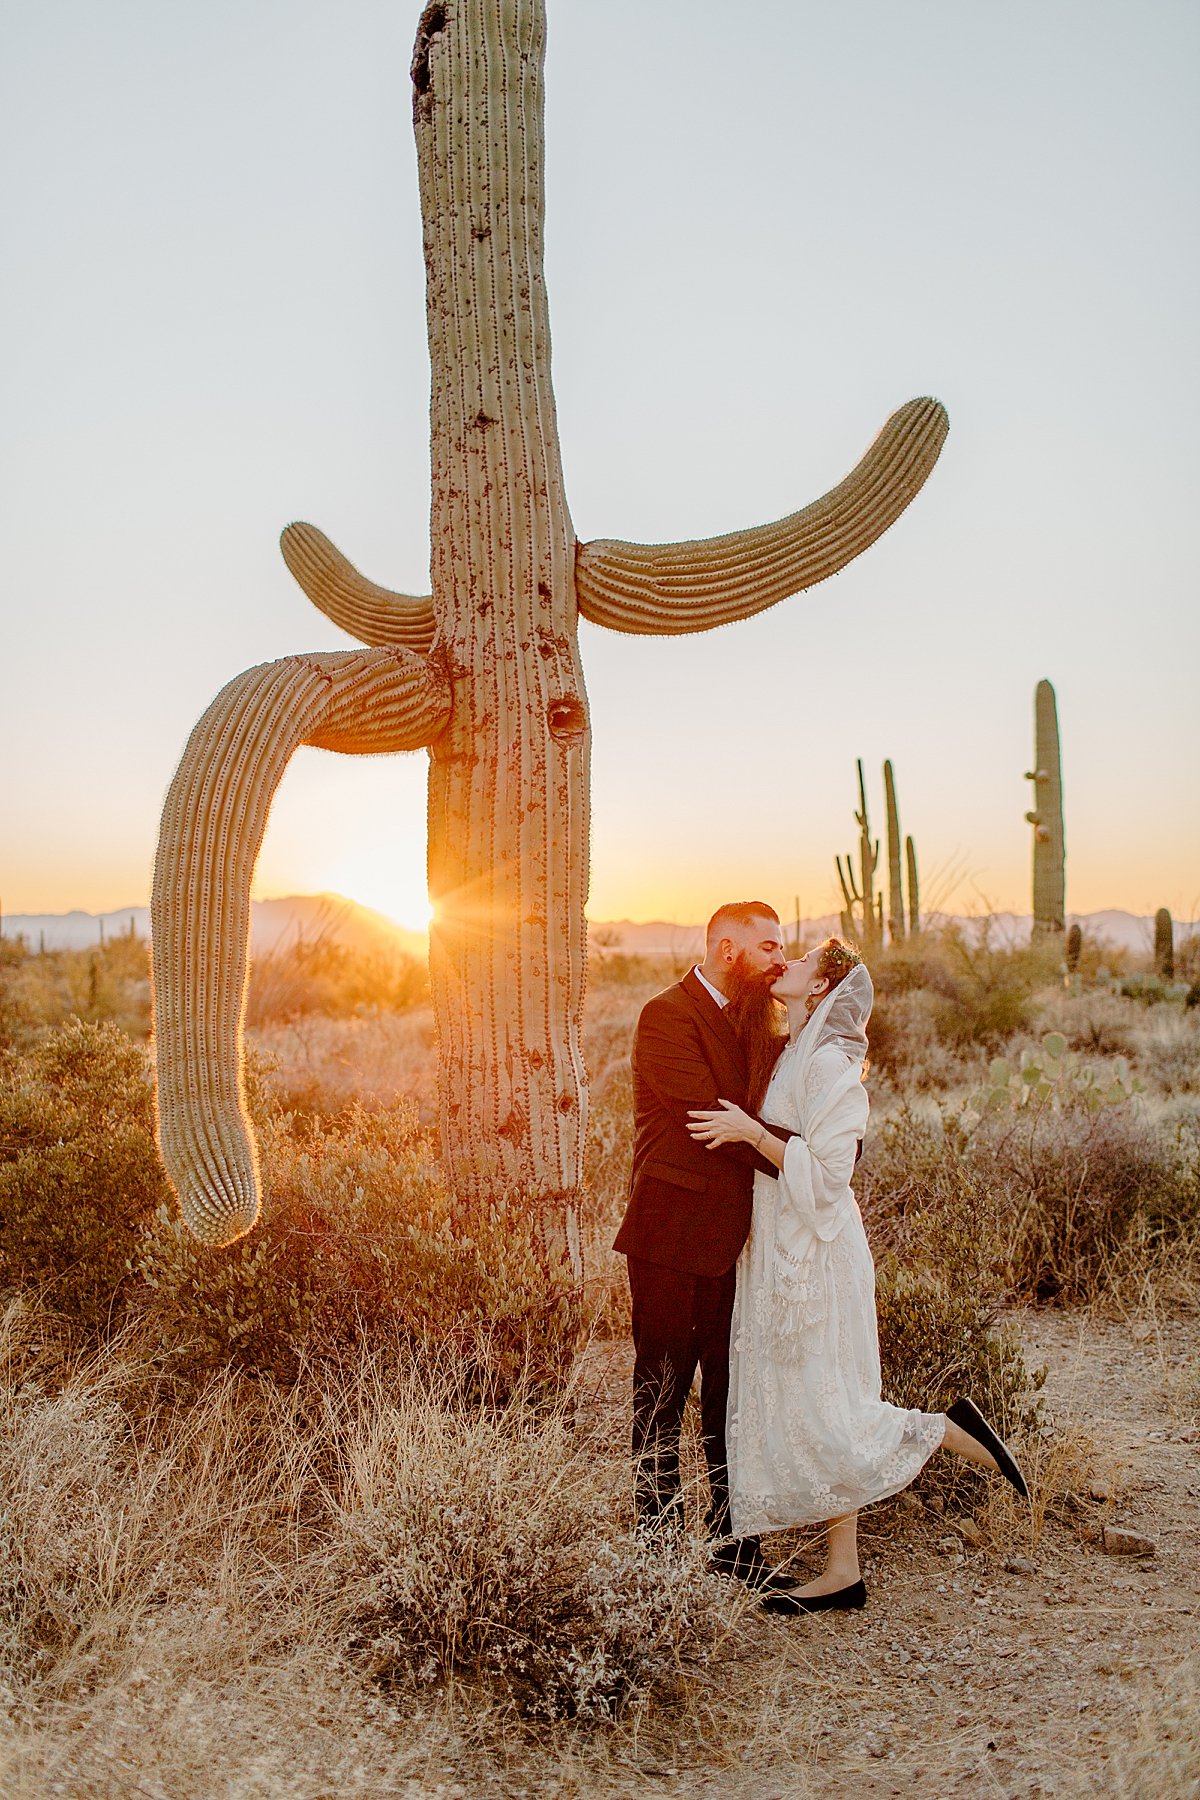  married couple at sunset next to cactus in the desert in arizona  